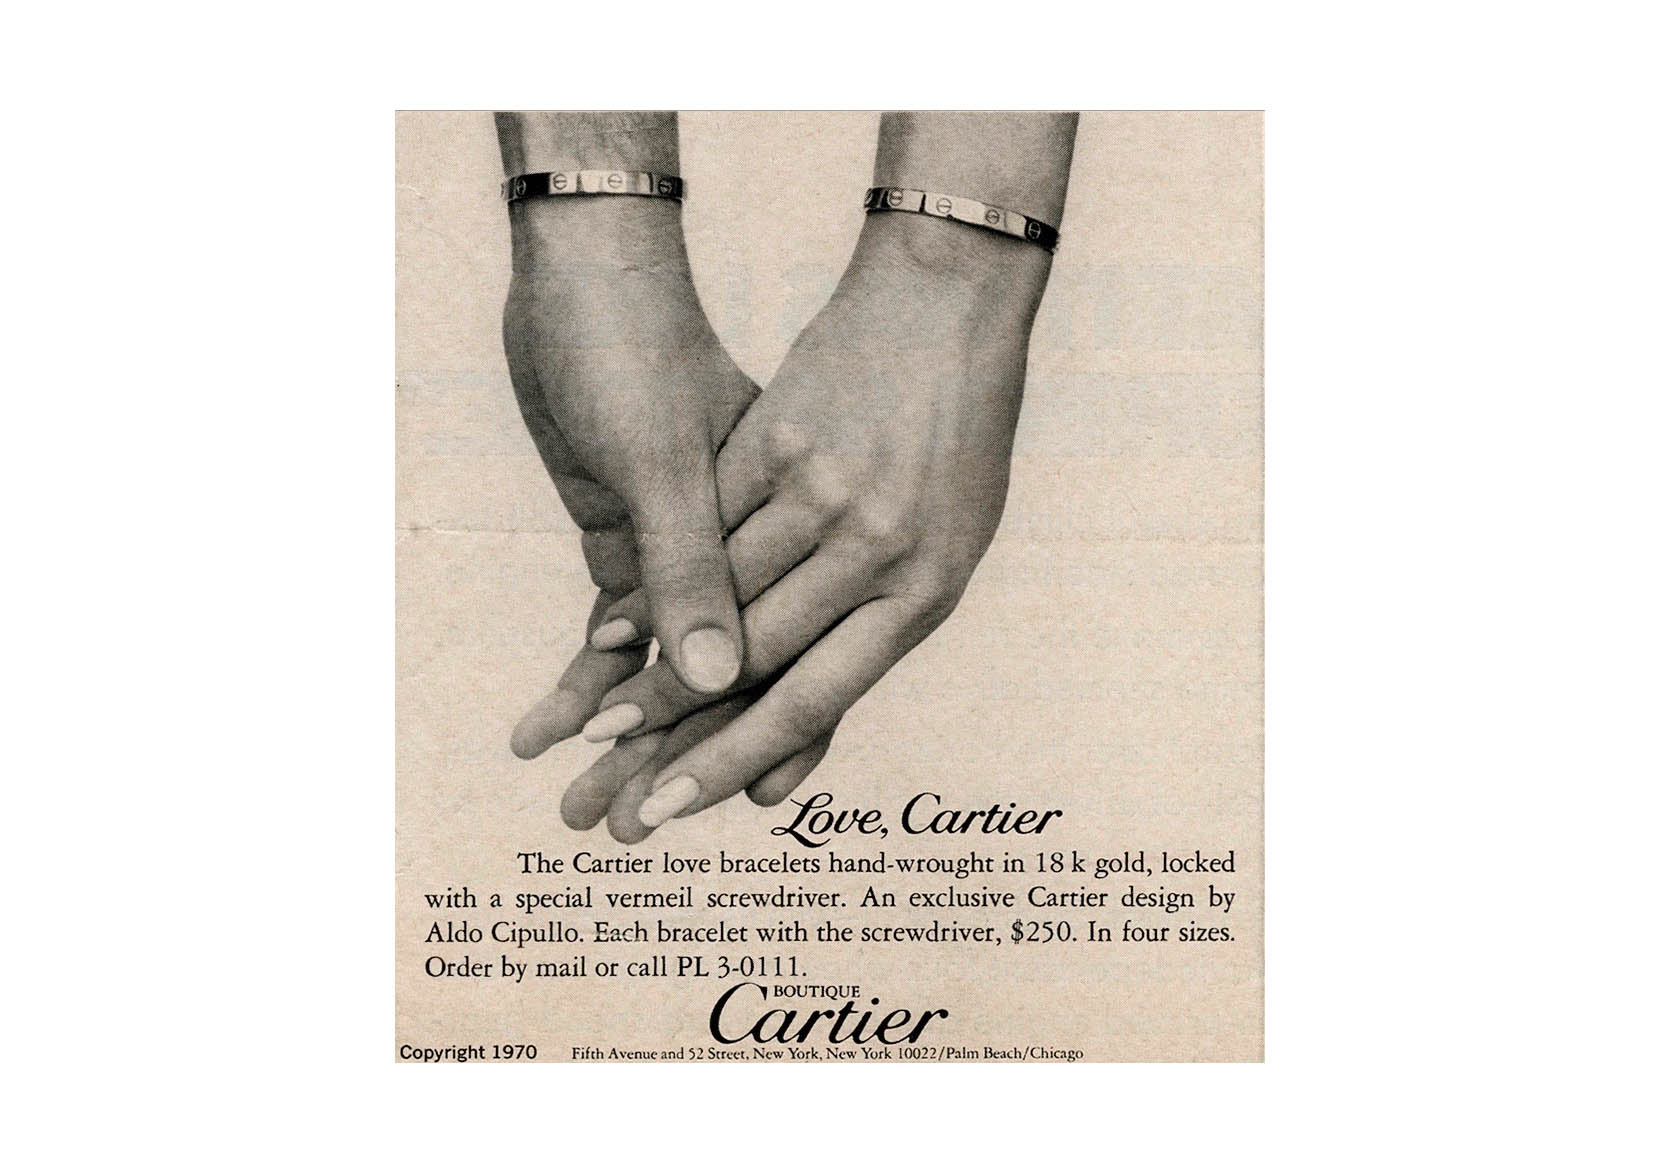 Tiffany's 'Lock' Bangle May Be Its Answer to Cartier's 'Love